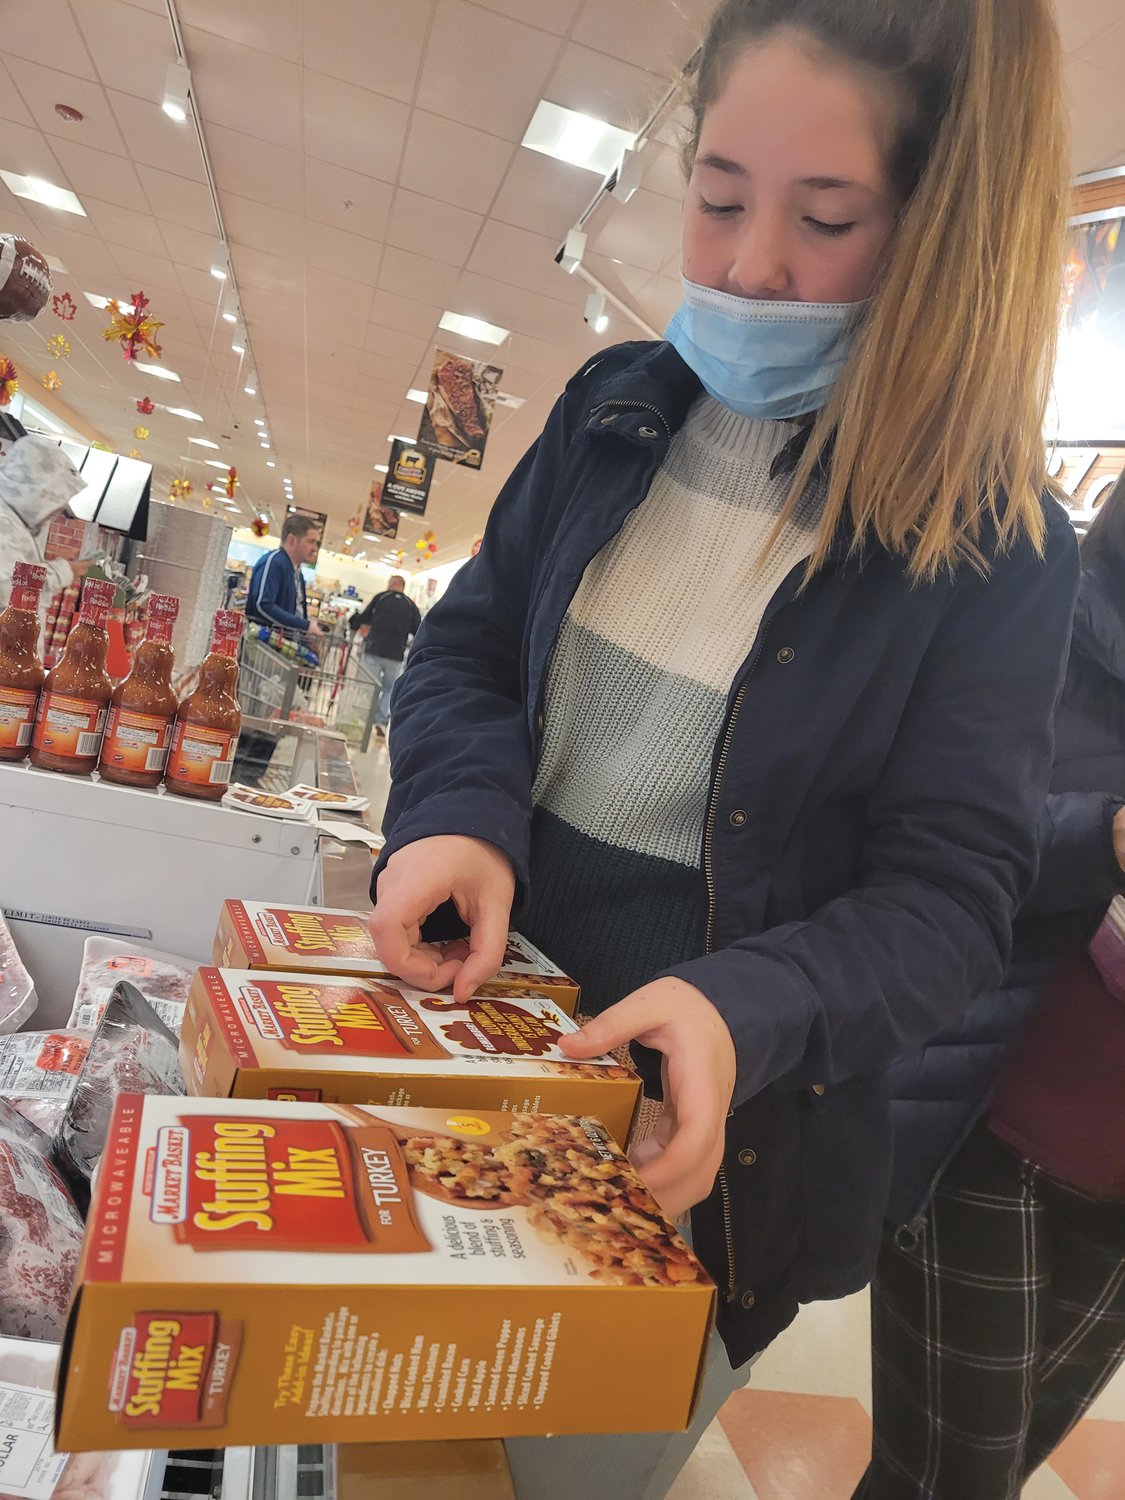 STICKER SHOCK: Johnston students and the Southern Providence County Regional Prevention Coalition, which includes Johnston Prevention Coalition, is participating in a Thanksgiving Sticker Shock Campaign. They’re slapping a special warning on the holiday birds for sale at the Johnston Market Basket store.